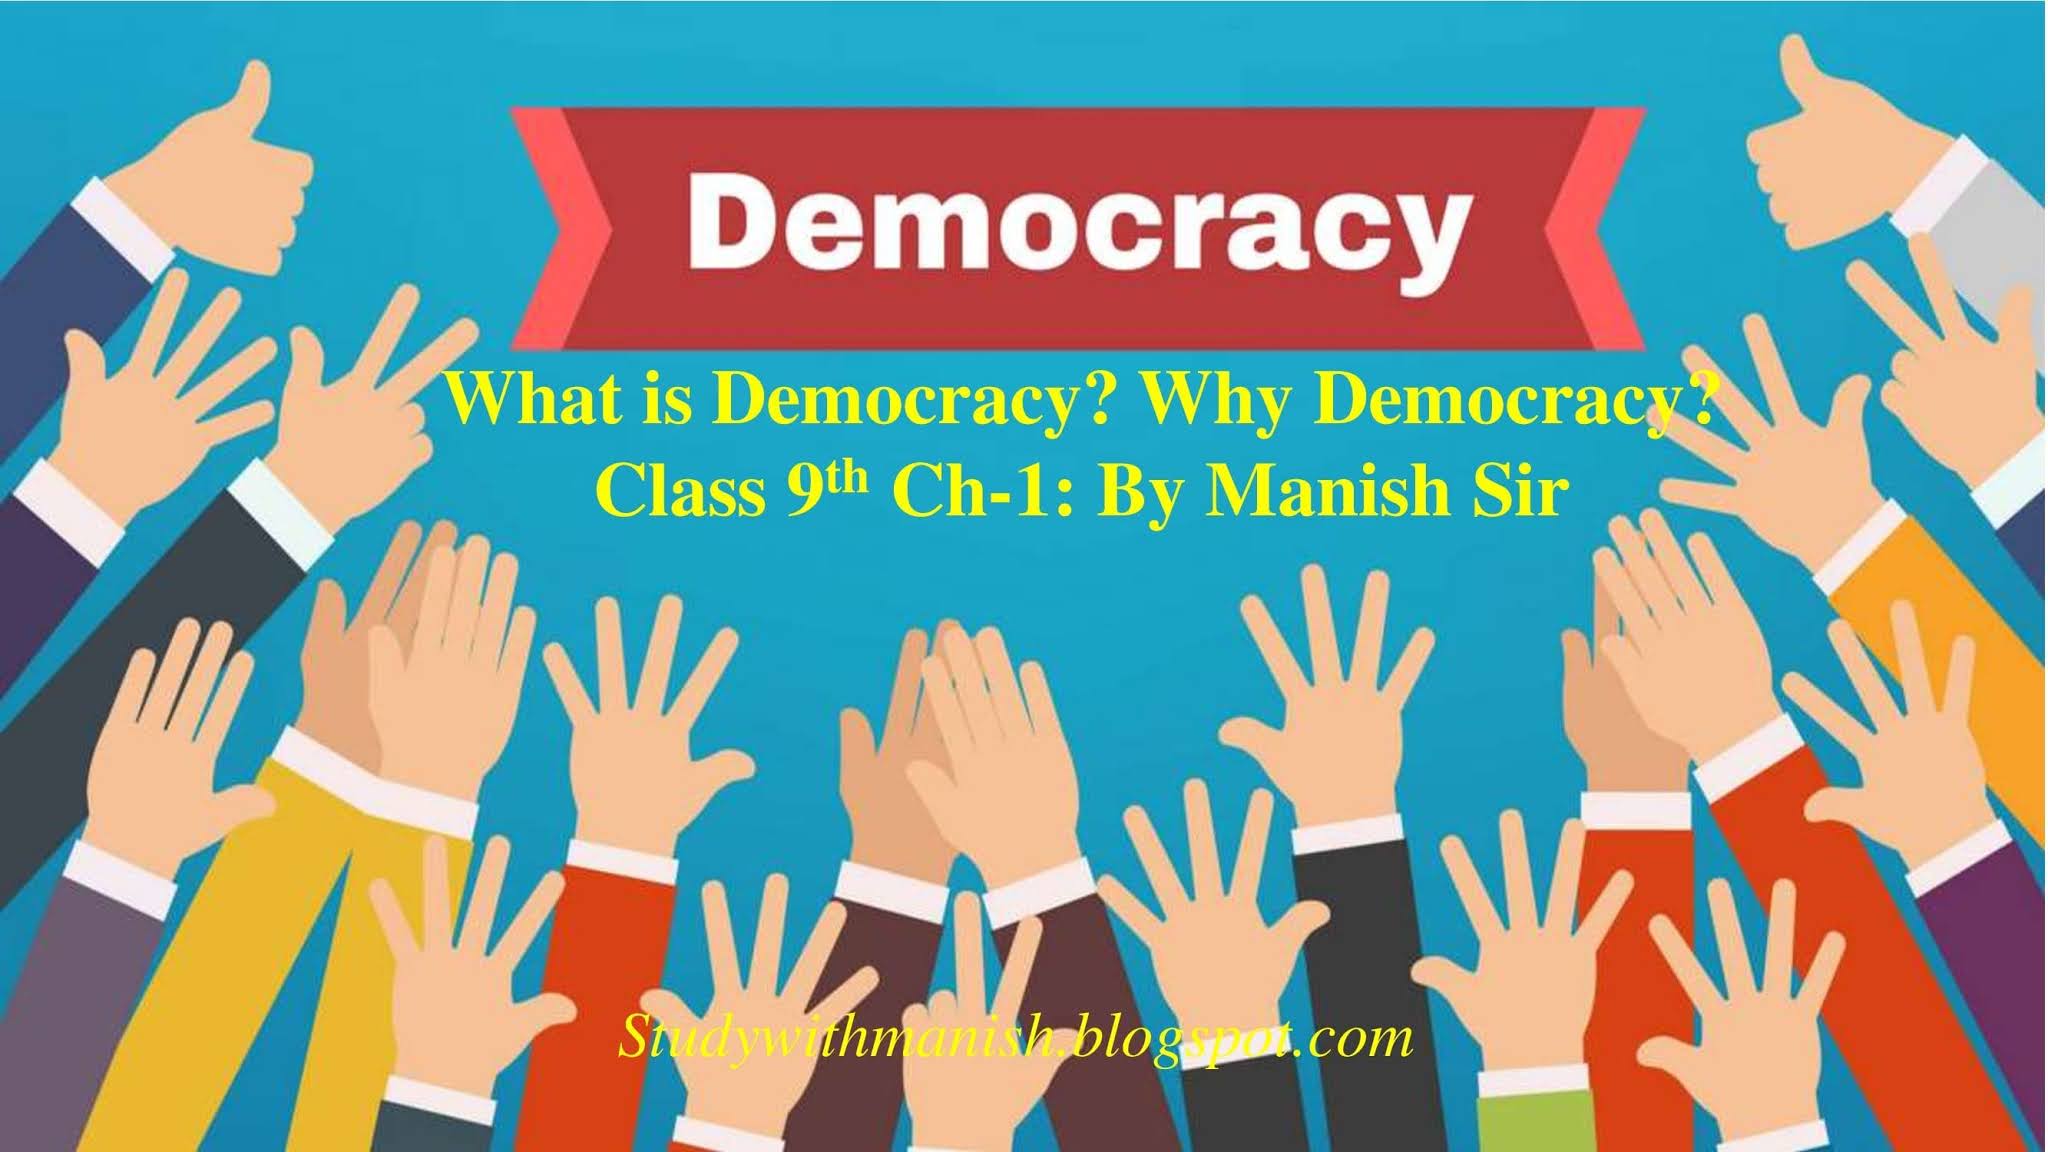 write an essay on democracy and poverty class 9th